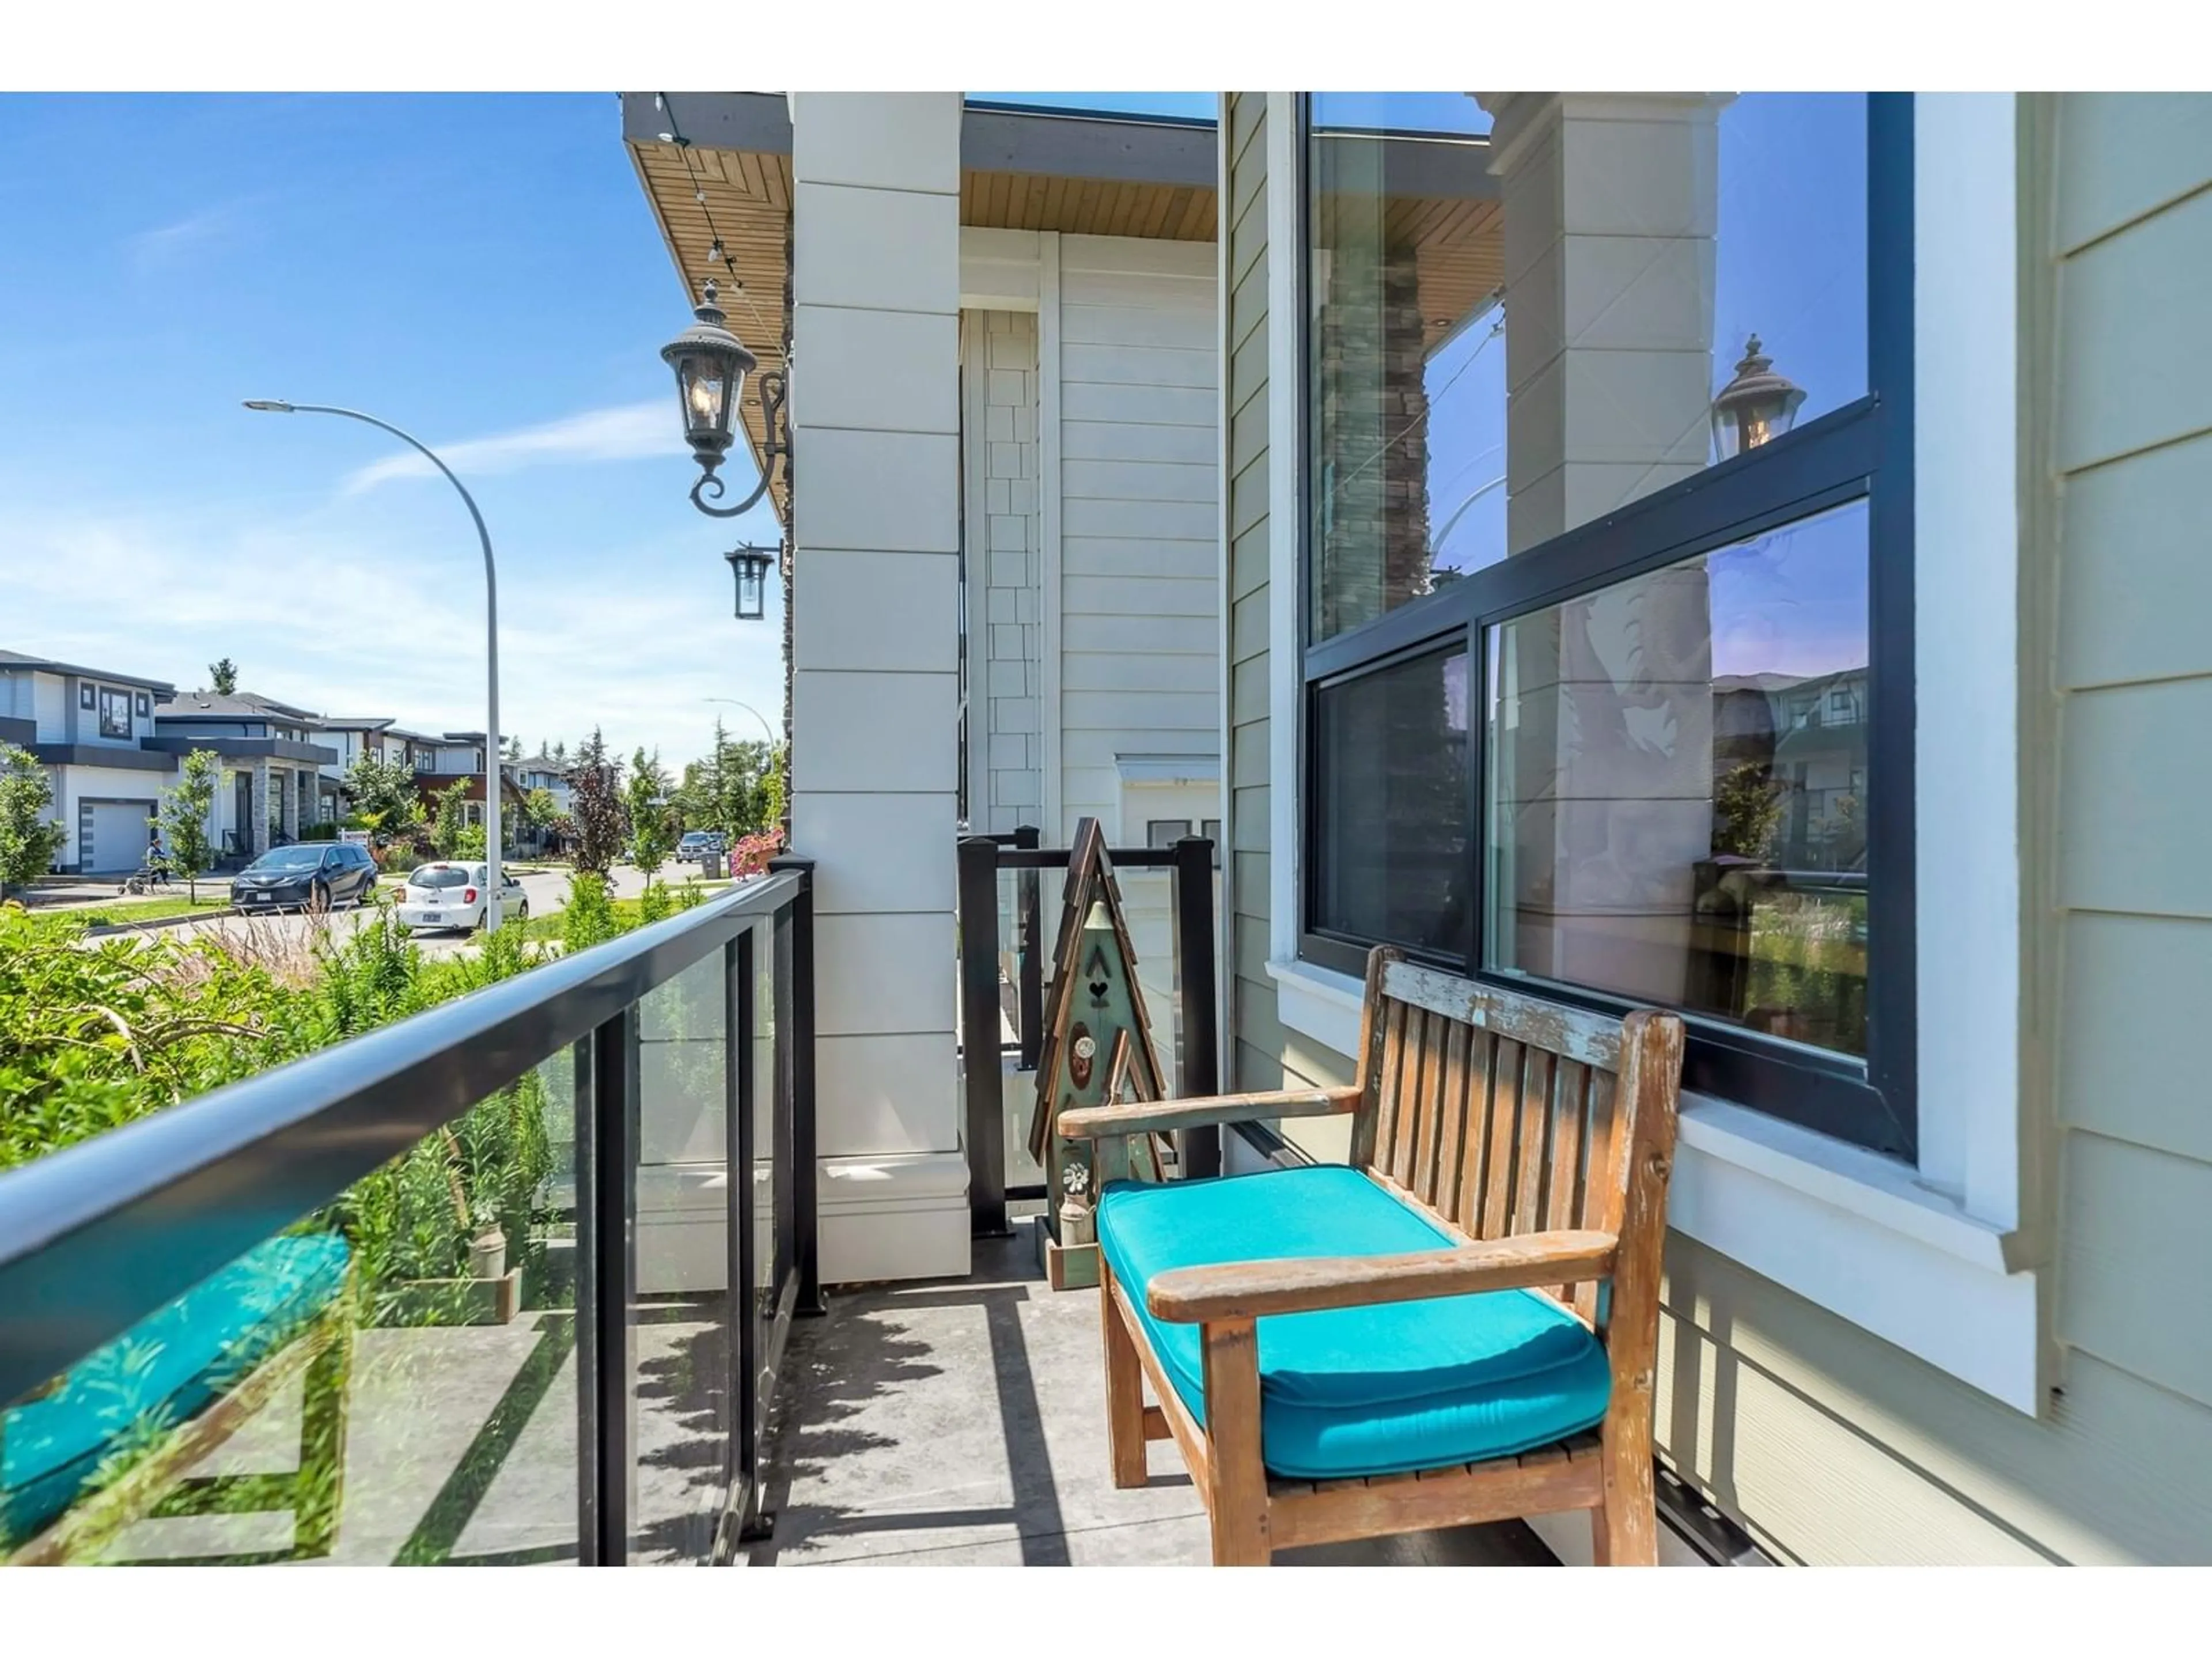 Balcony in the apartment for 16683 18B AVENUE, Surrey British Columbia V3Z1A2